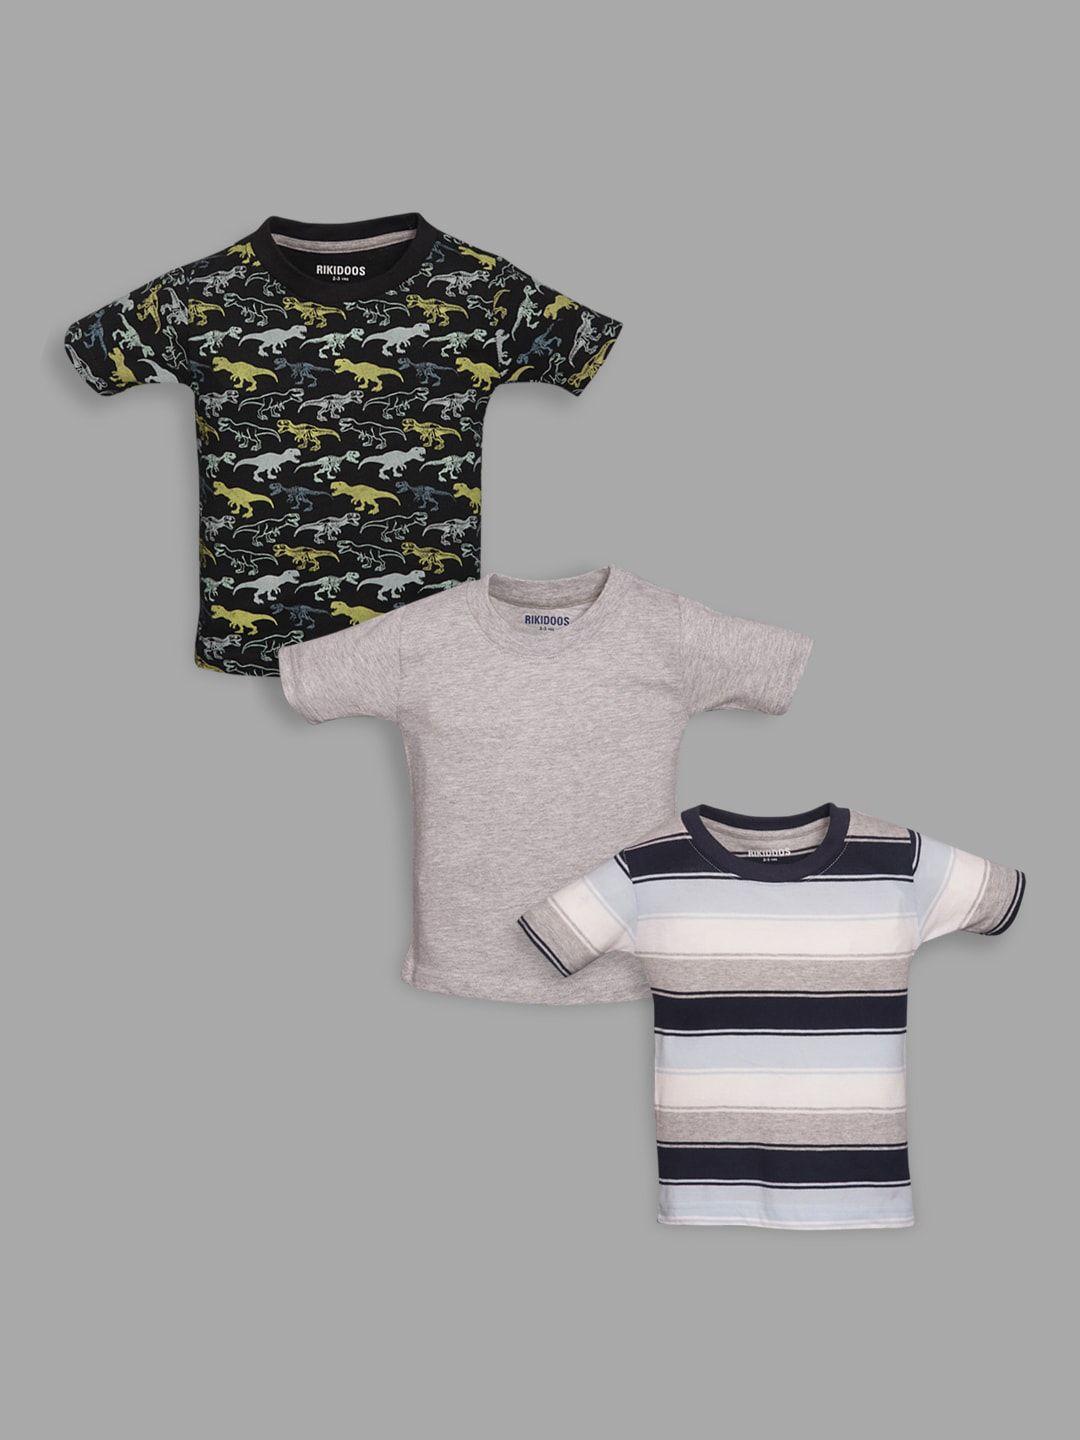 rikidoos boys pack of 3 round neck printed cotton t-shirt